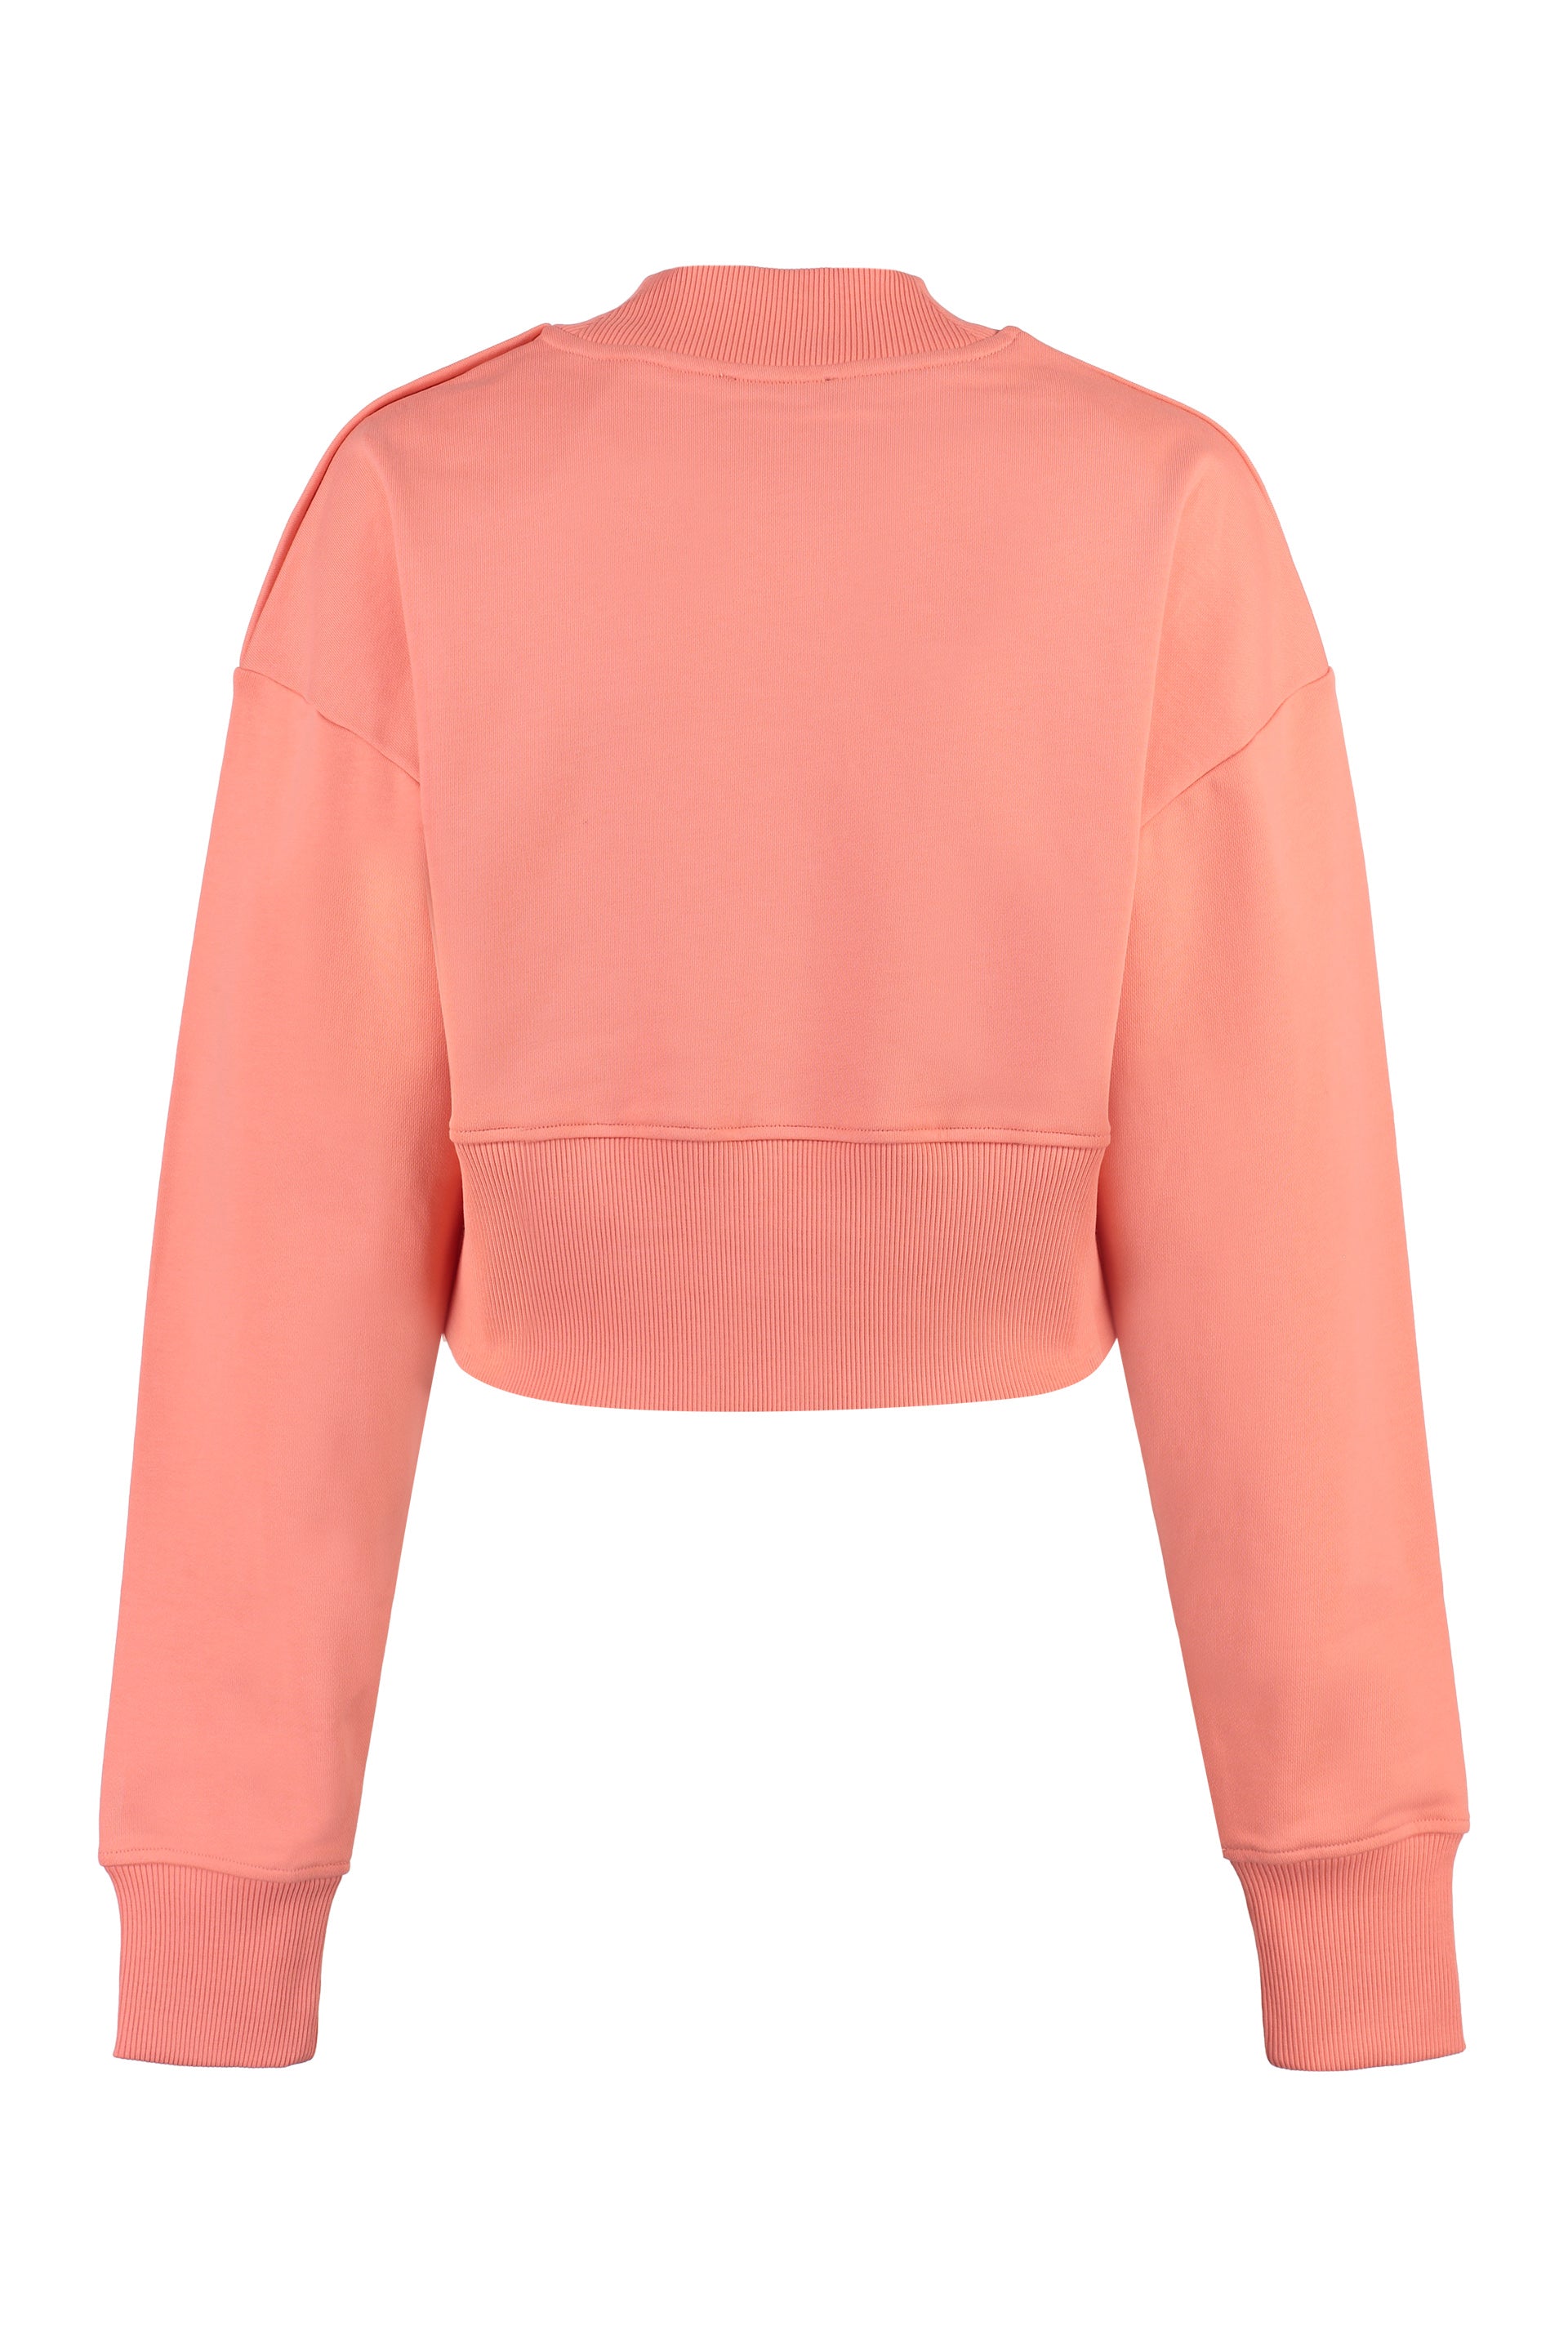 Shop Balmain Cropped Coral Velvet Sweatshirt With Embellished Buttons